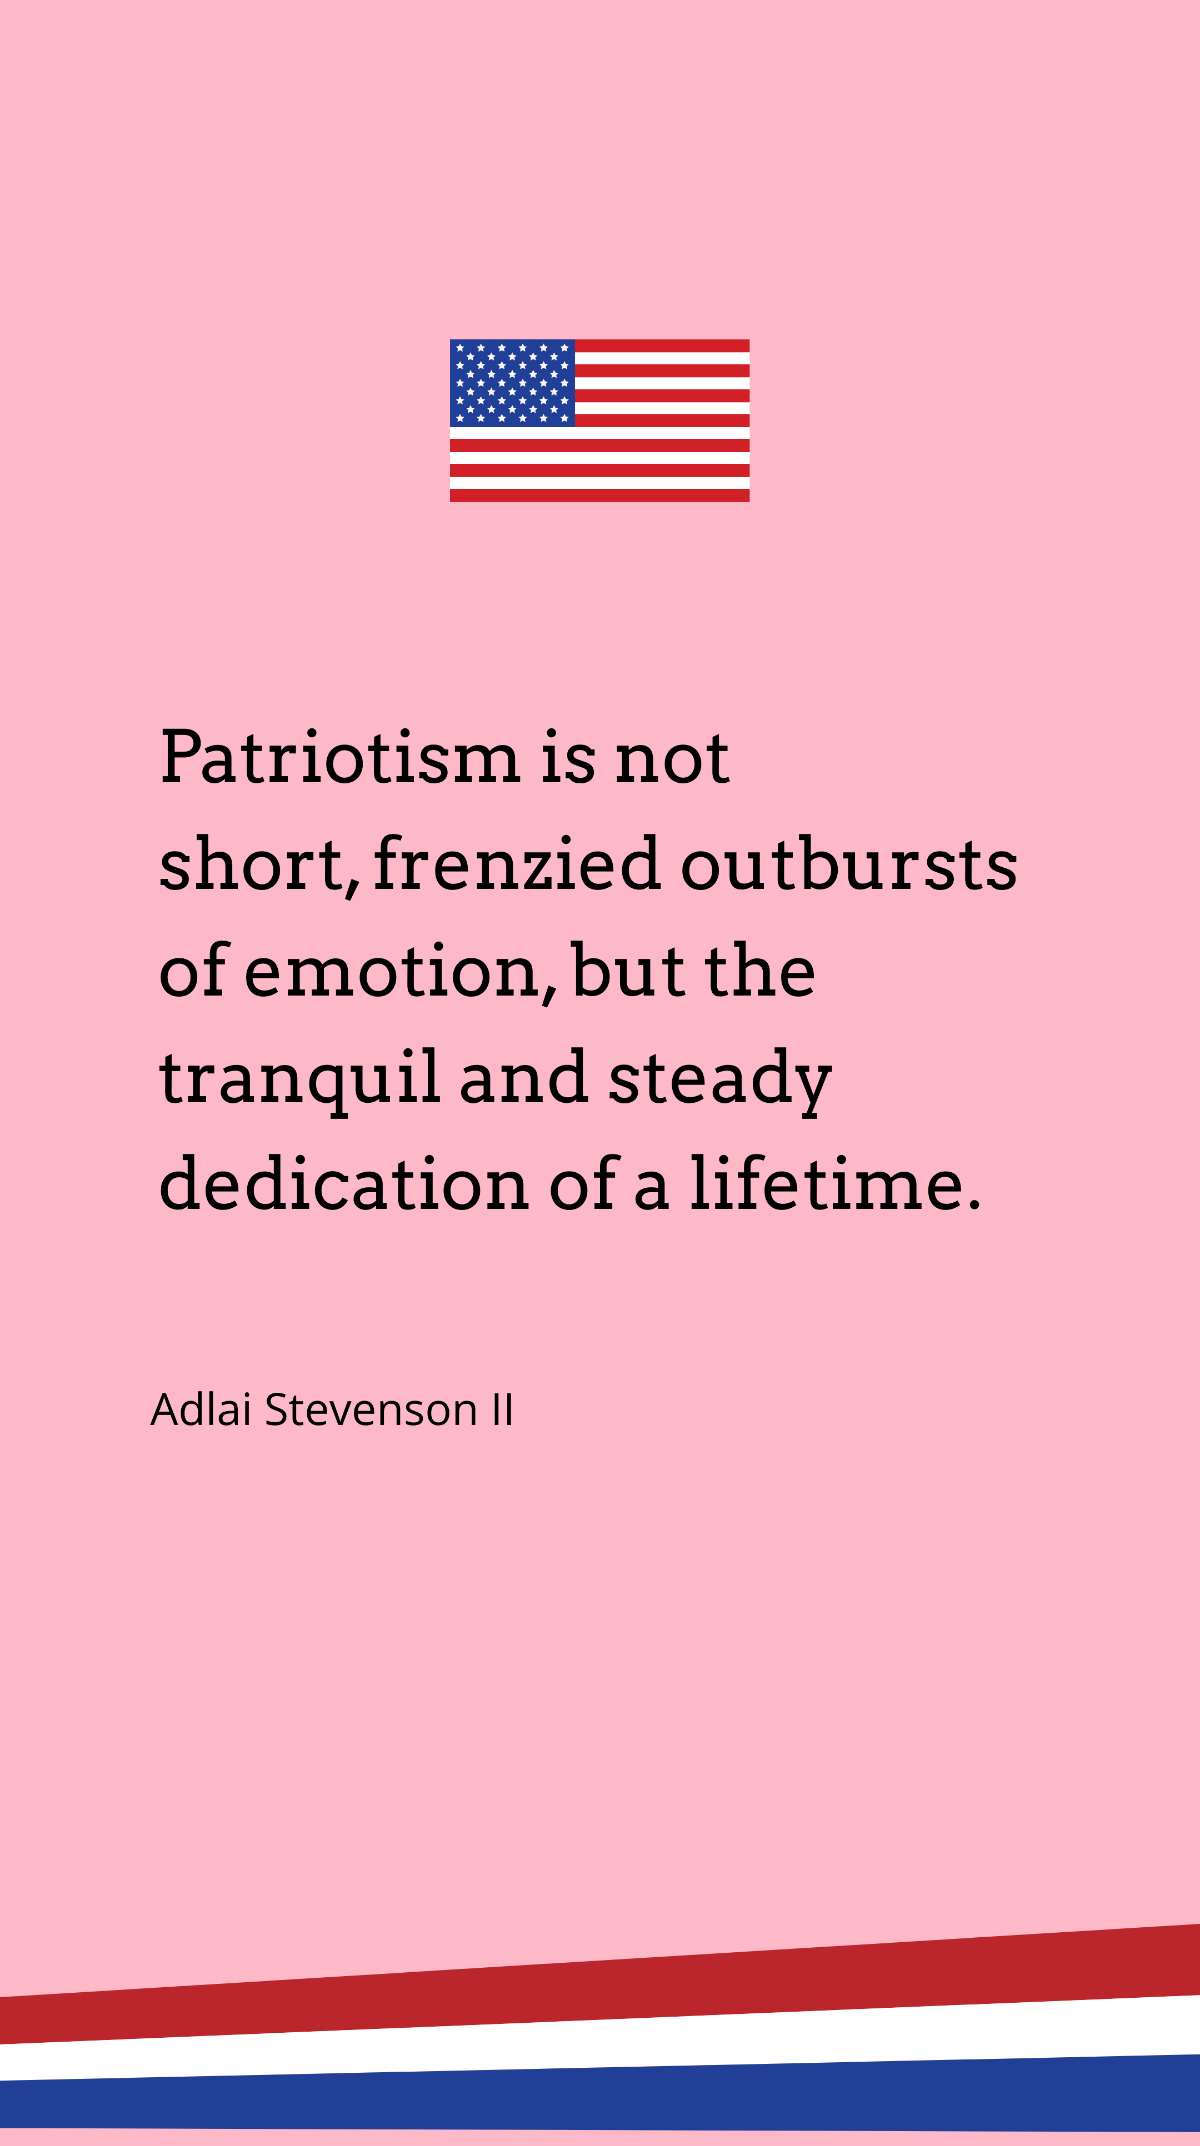 Adlai Stevenson II - “Patriotism is not short, frenzied outbursts of emotion, but the tranquil and steady dedication of a lifetime.” Template